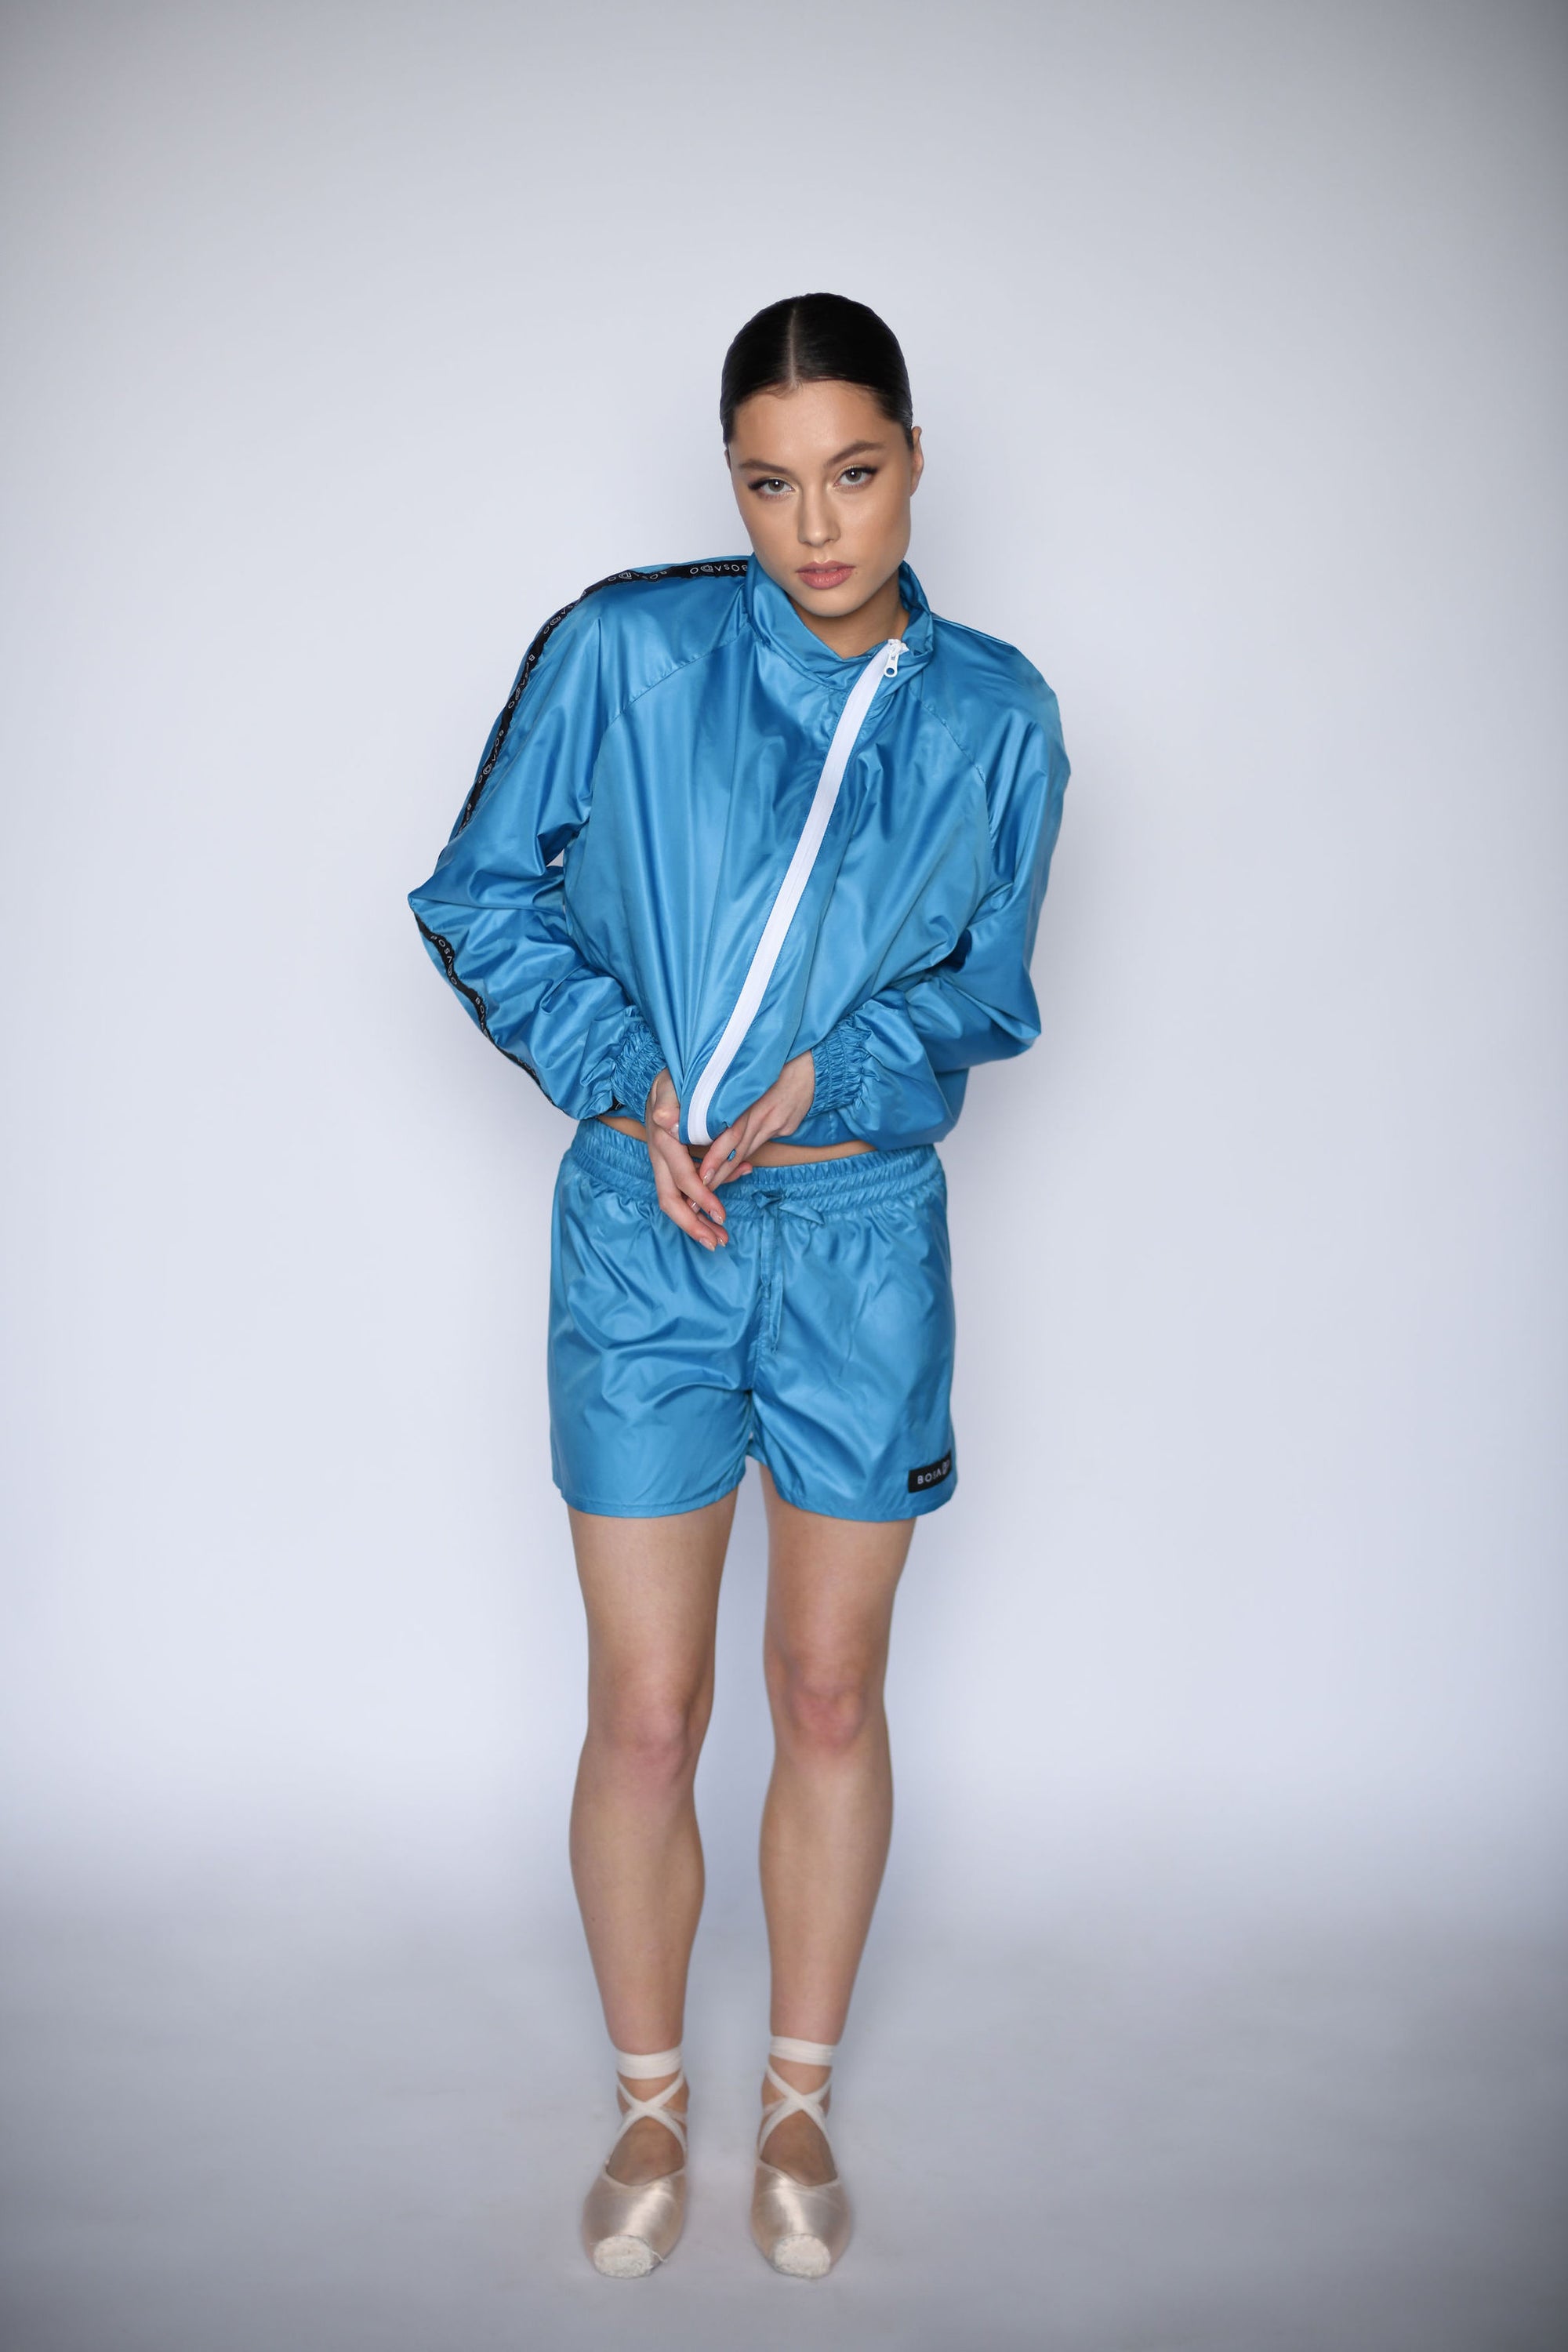 NEW URBAN SWAN COLLECTION S/S 23 | Ice blue sports suit with shorts